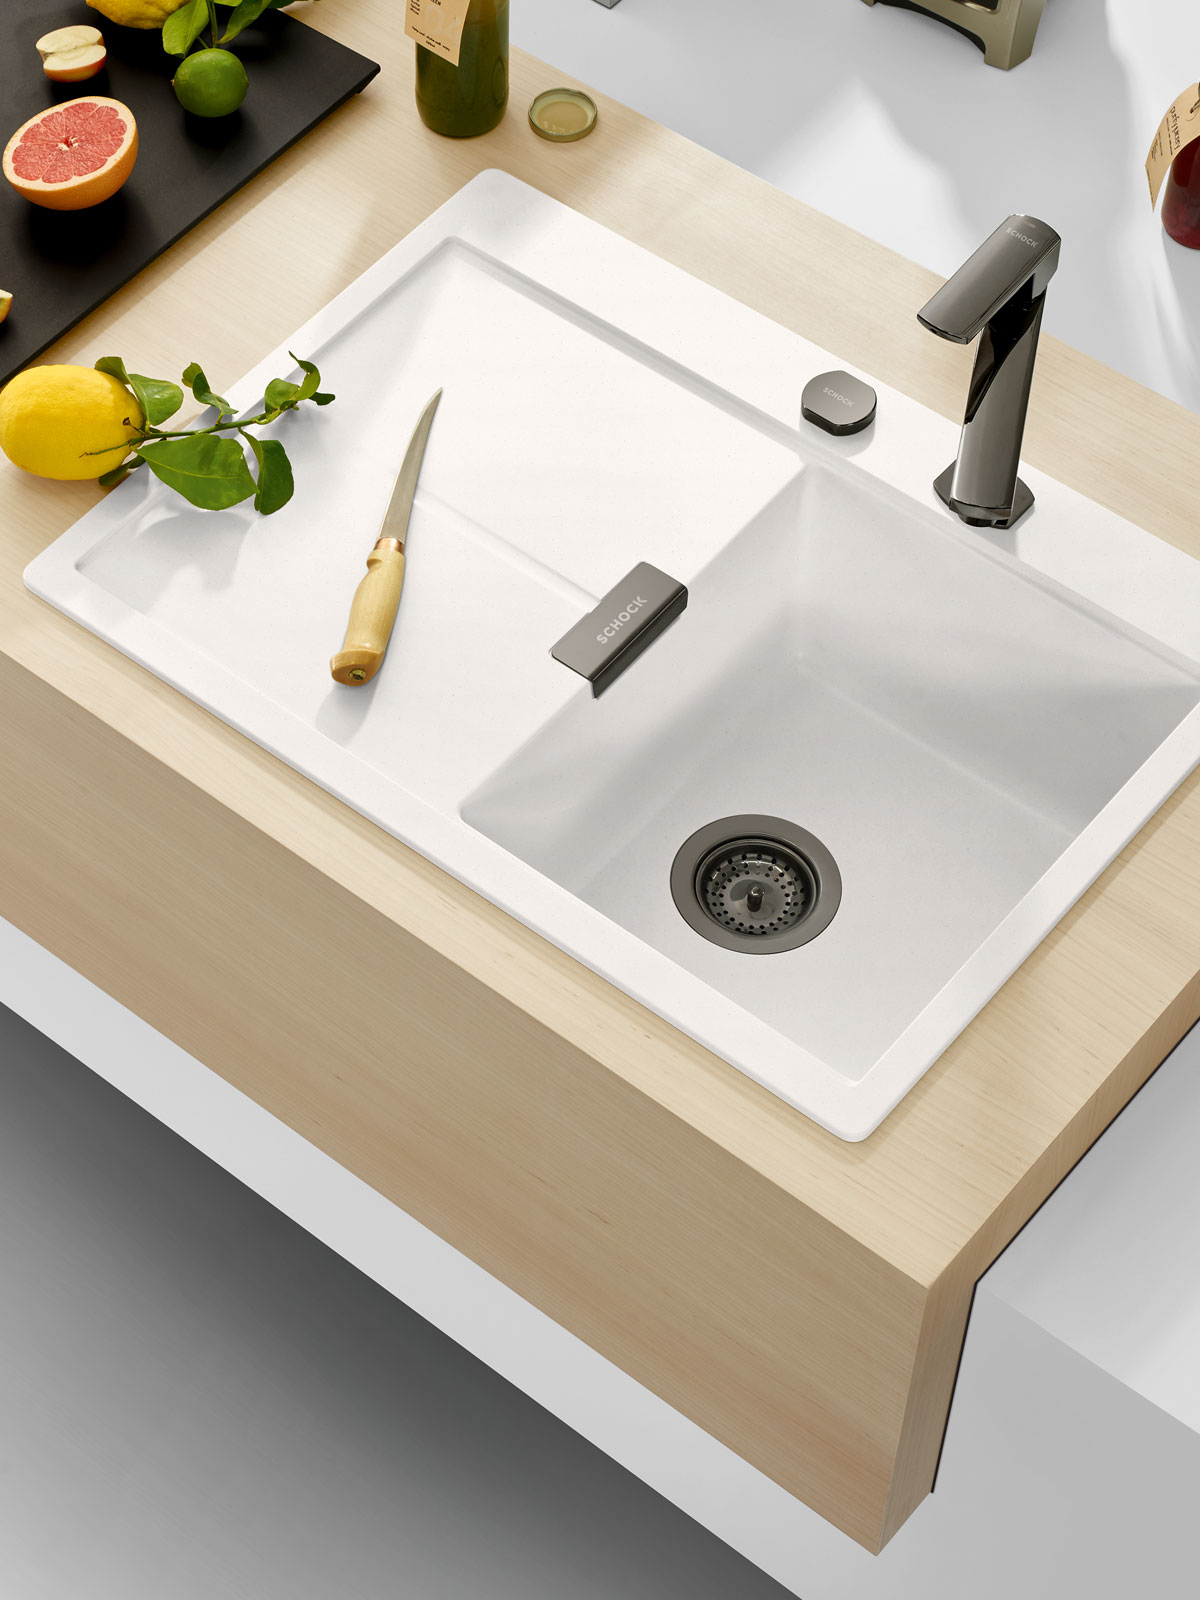 Sinks for 40cm cabinets